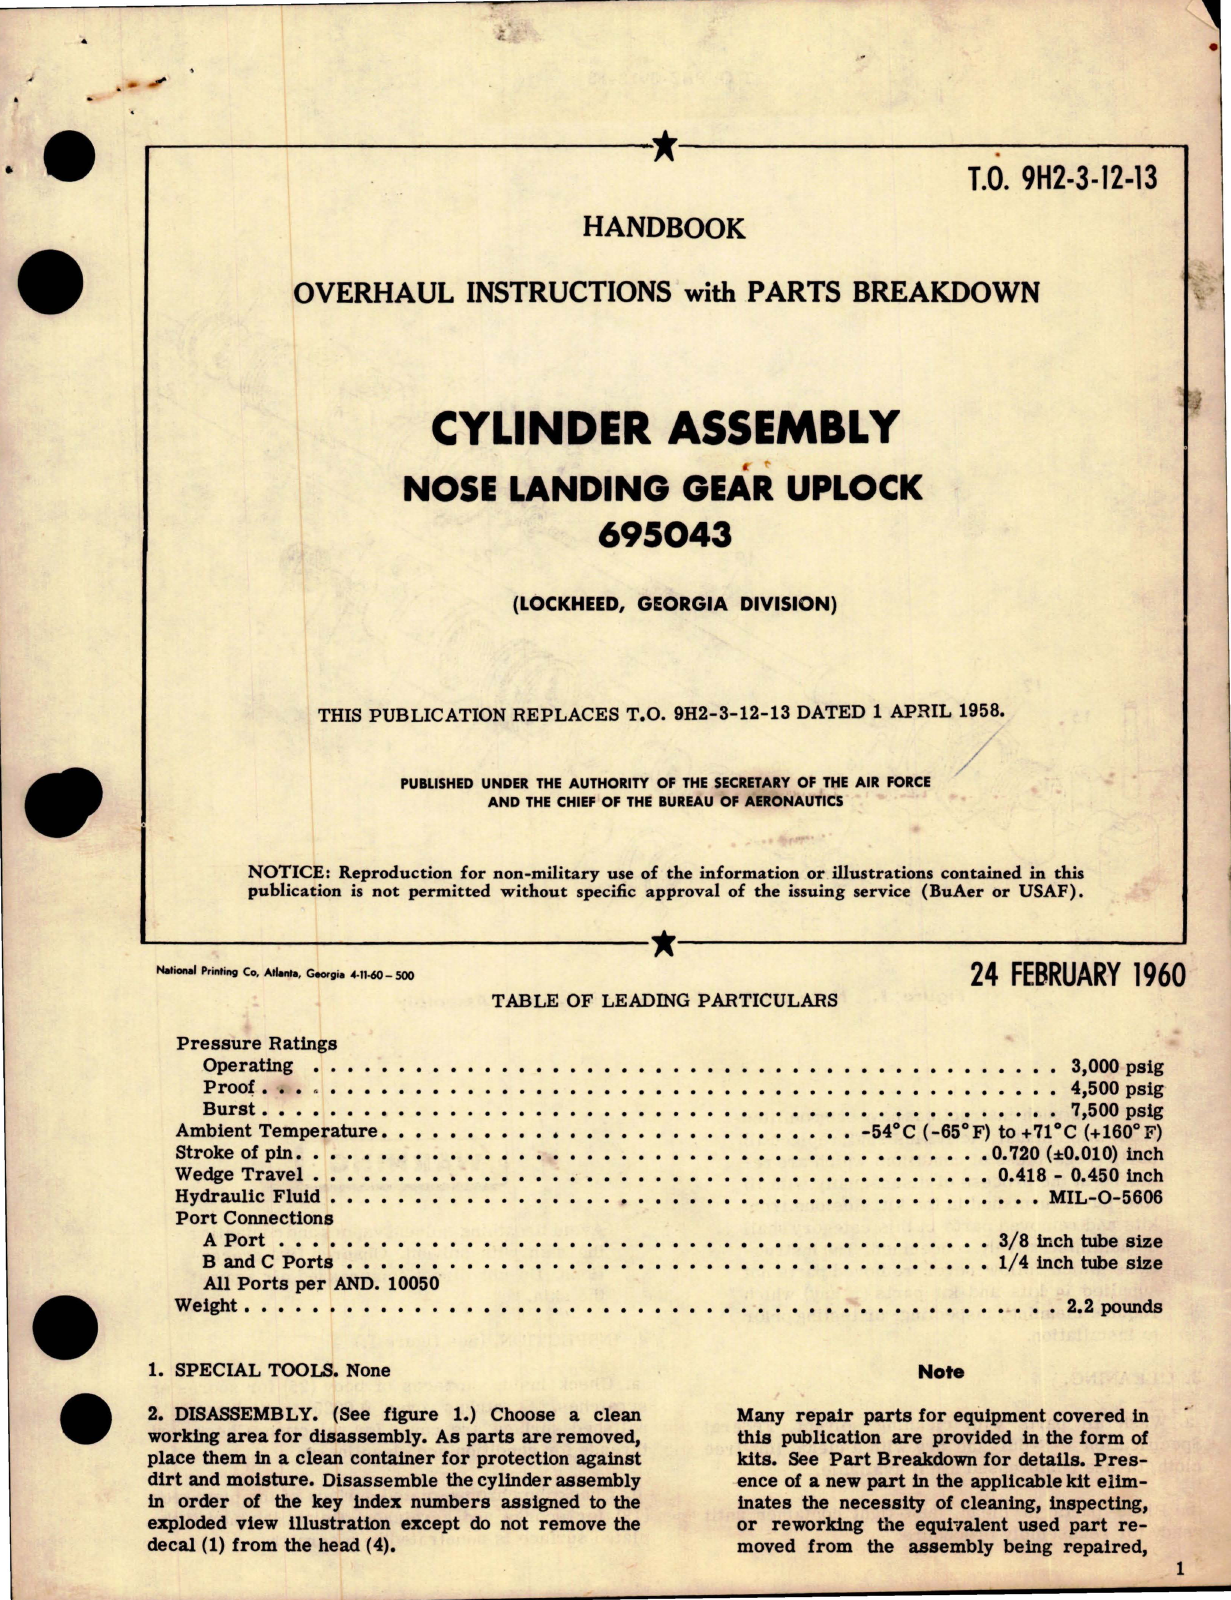 Sample page 1 from AirCorps Library document: Overhaul Instructions with Parts for Cylinder Assembly Nose Landing Gear Uplock - 695043 